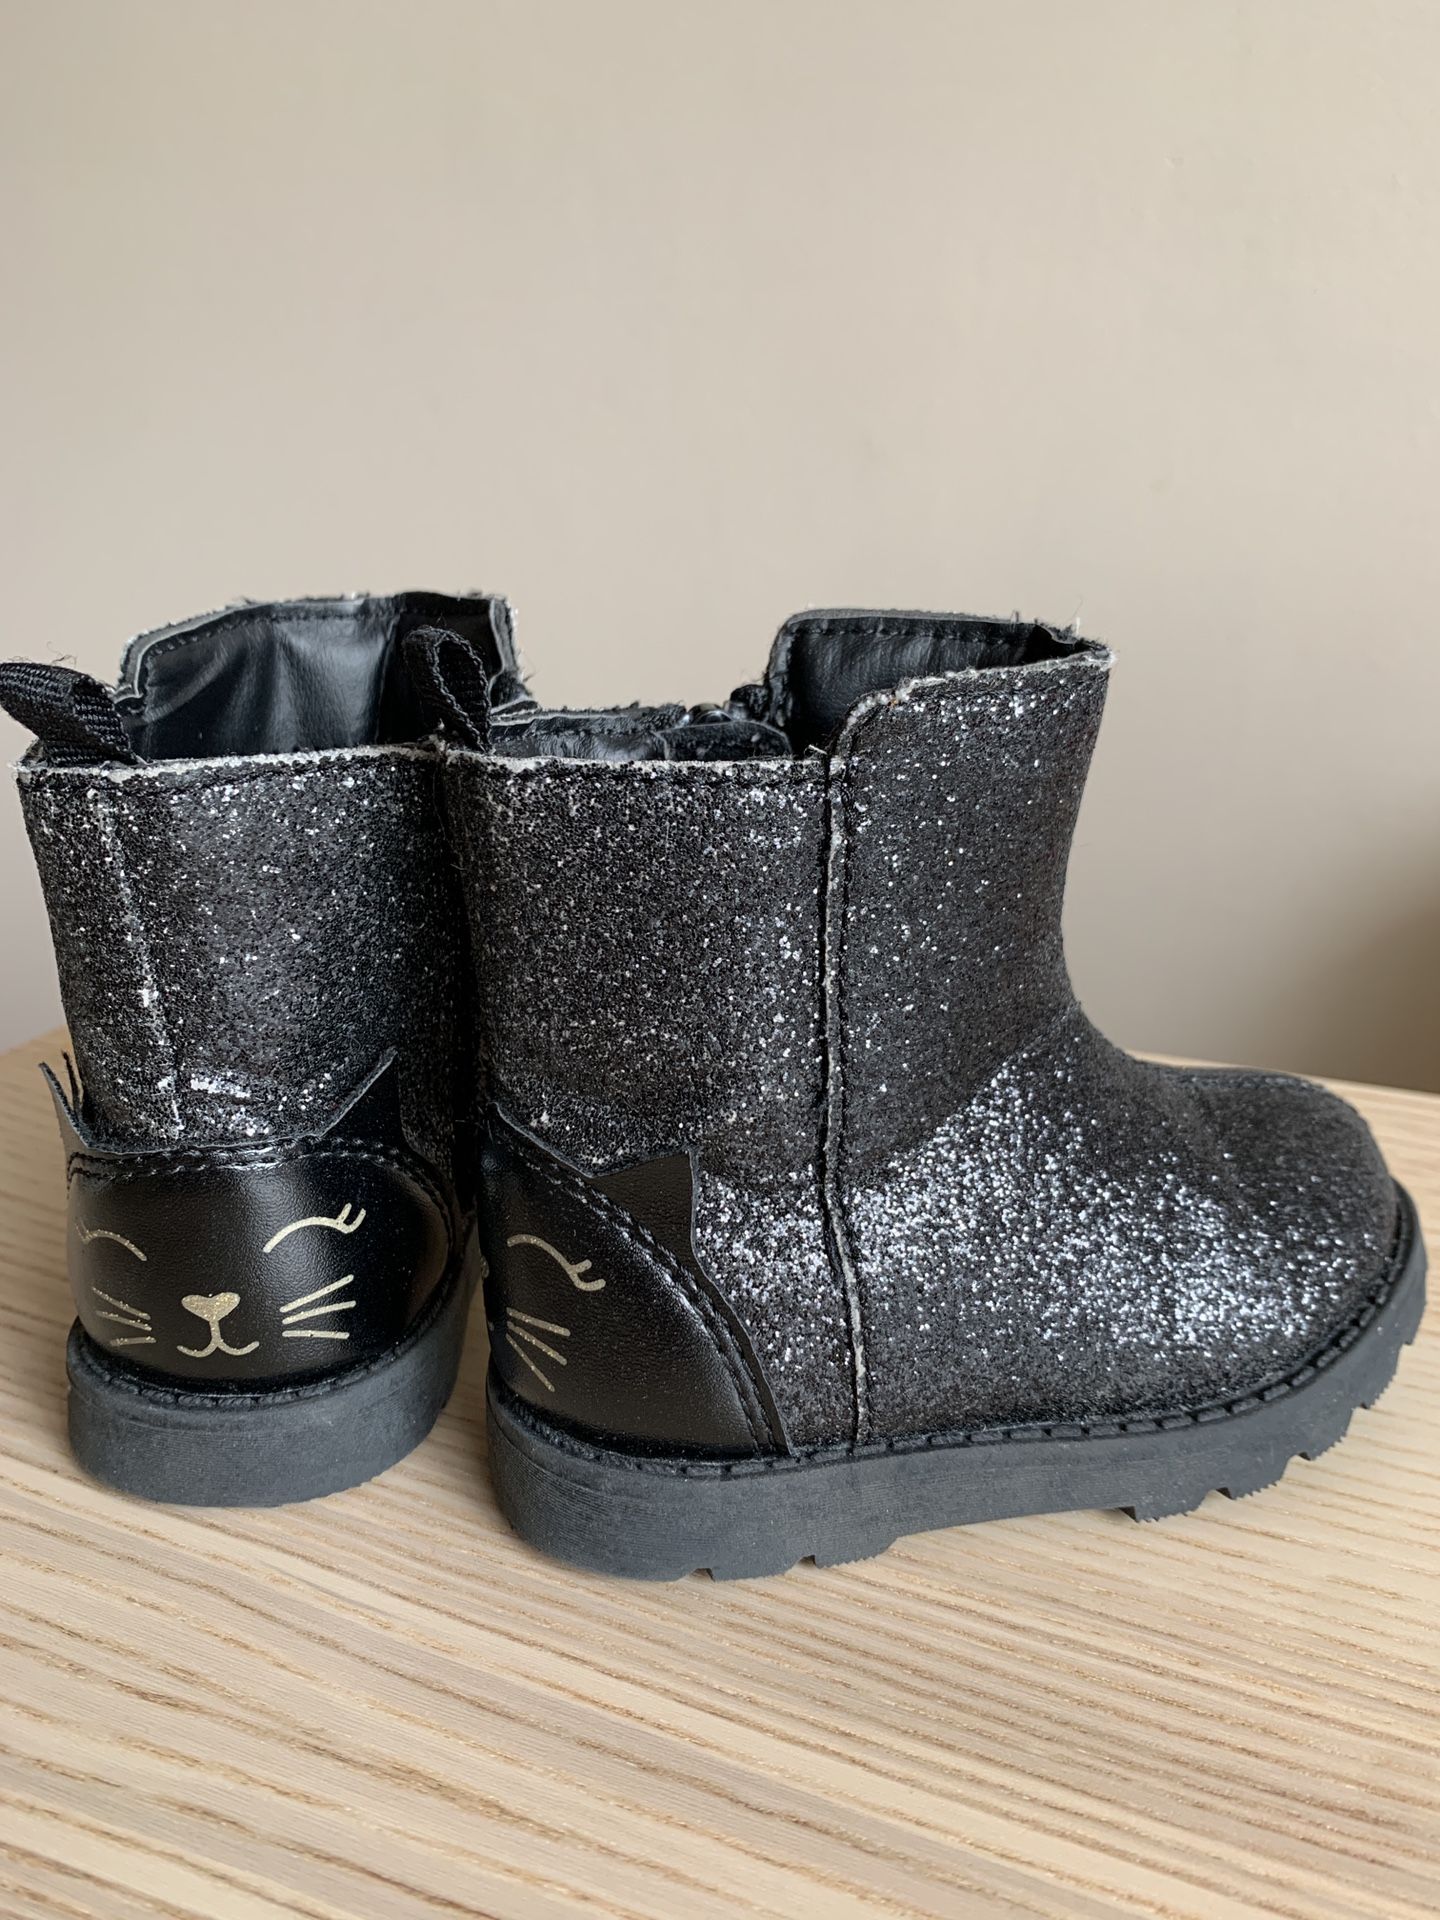 Toddler size 5 Carter’s boots